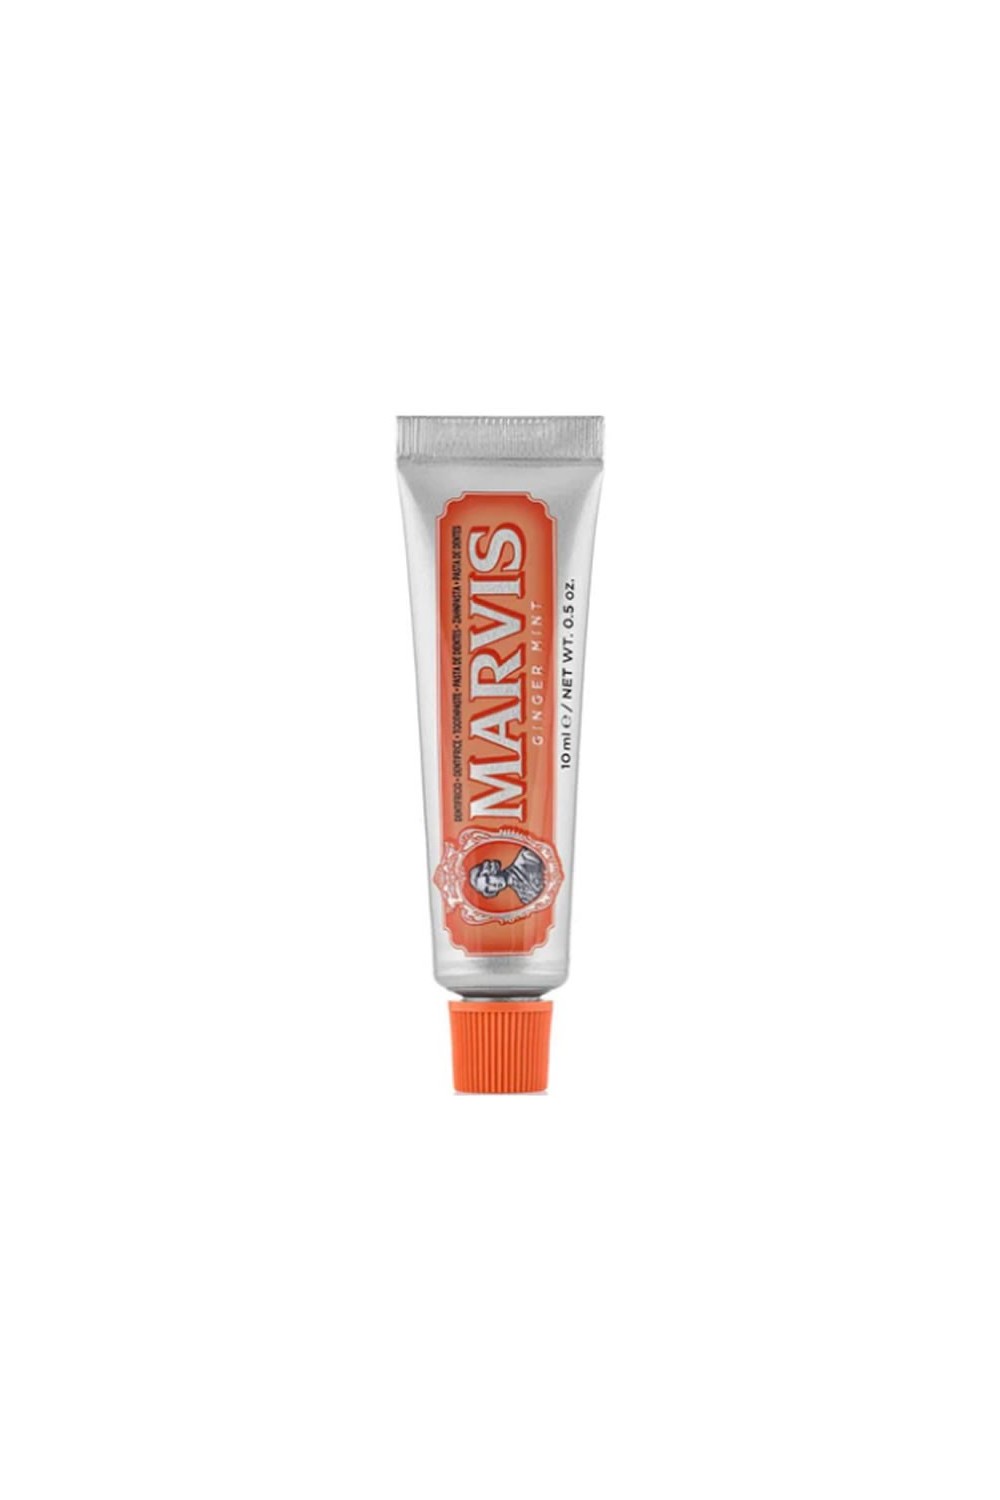 Marvis Ginger Mint Toothpaste 10ml